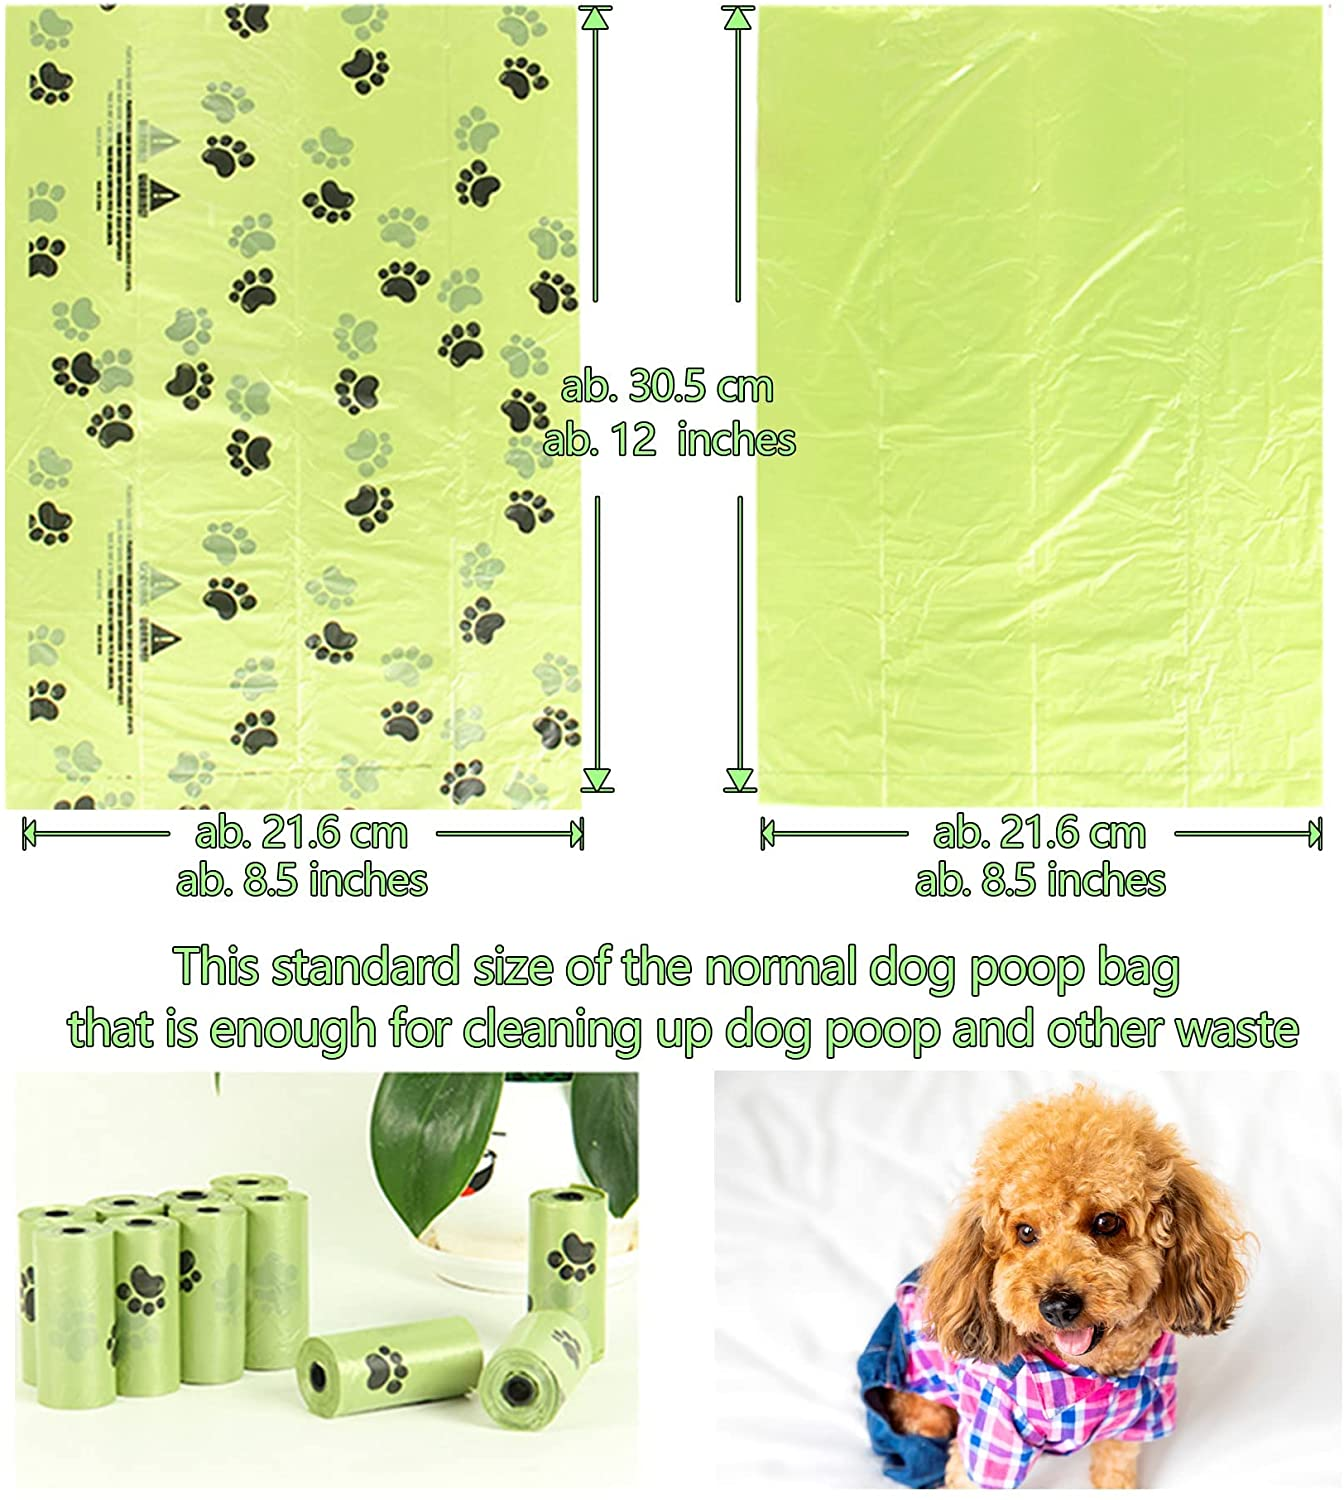 Biodegradable Dog Poop Bags Refill Rolls, Green Compostable Dog Waste Bags